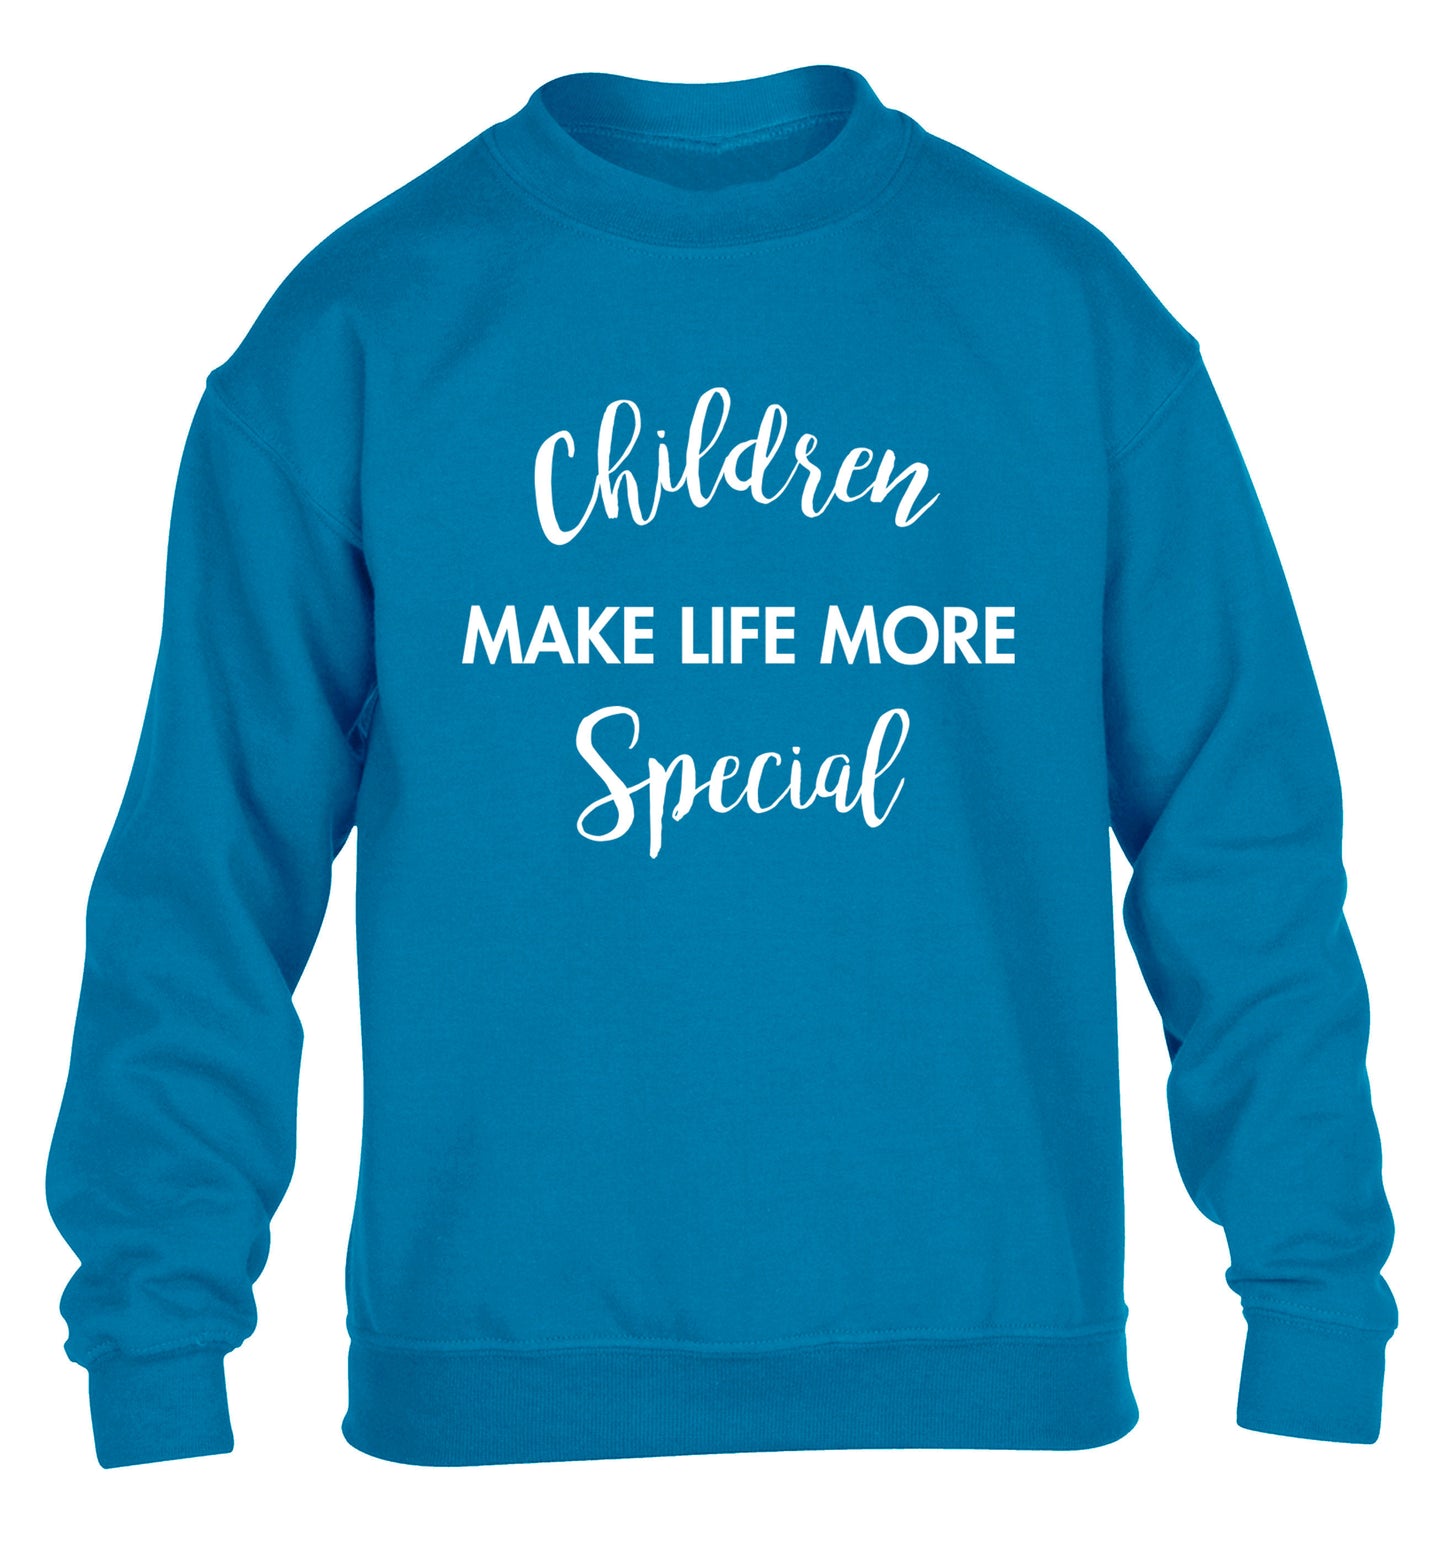 Children make life more special children's blue sweater 12-14 Years